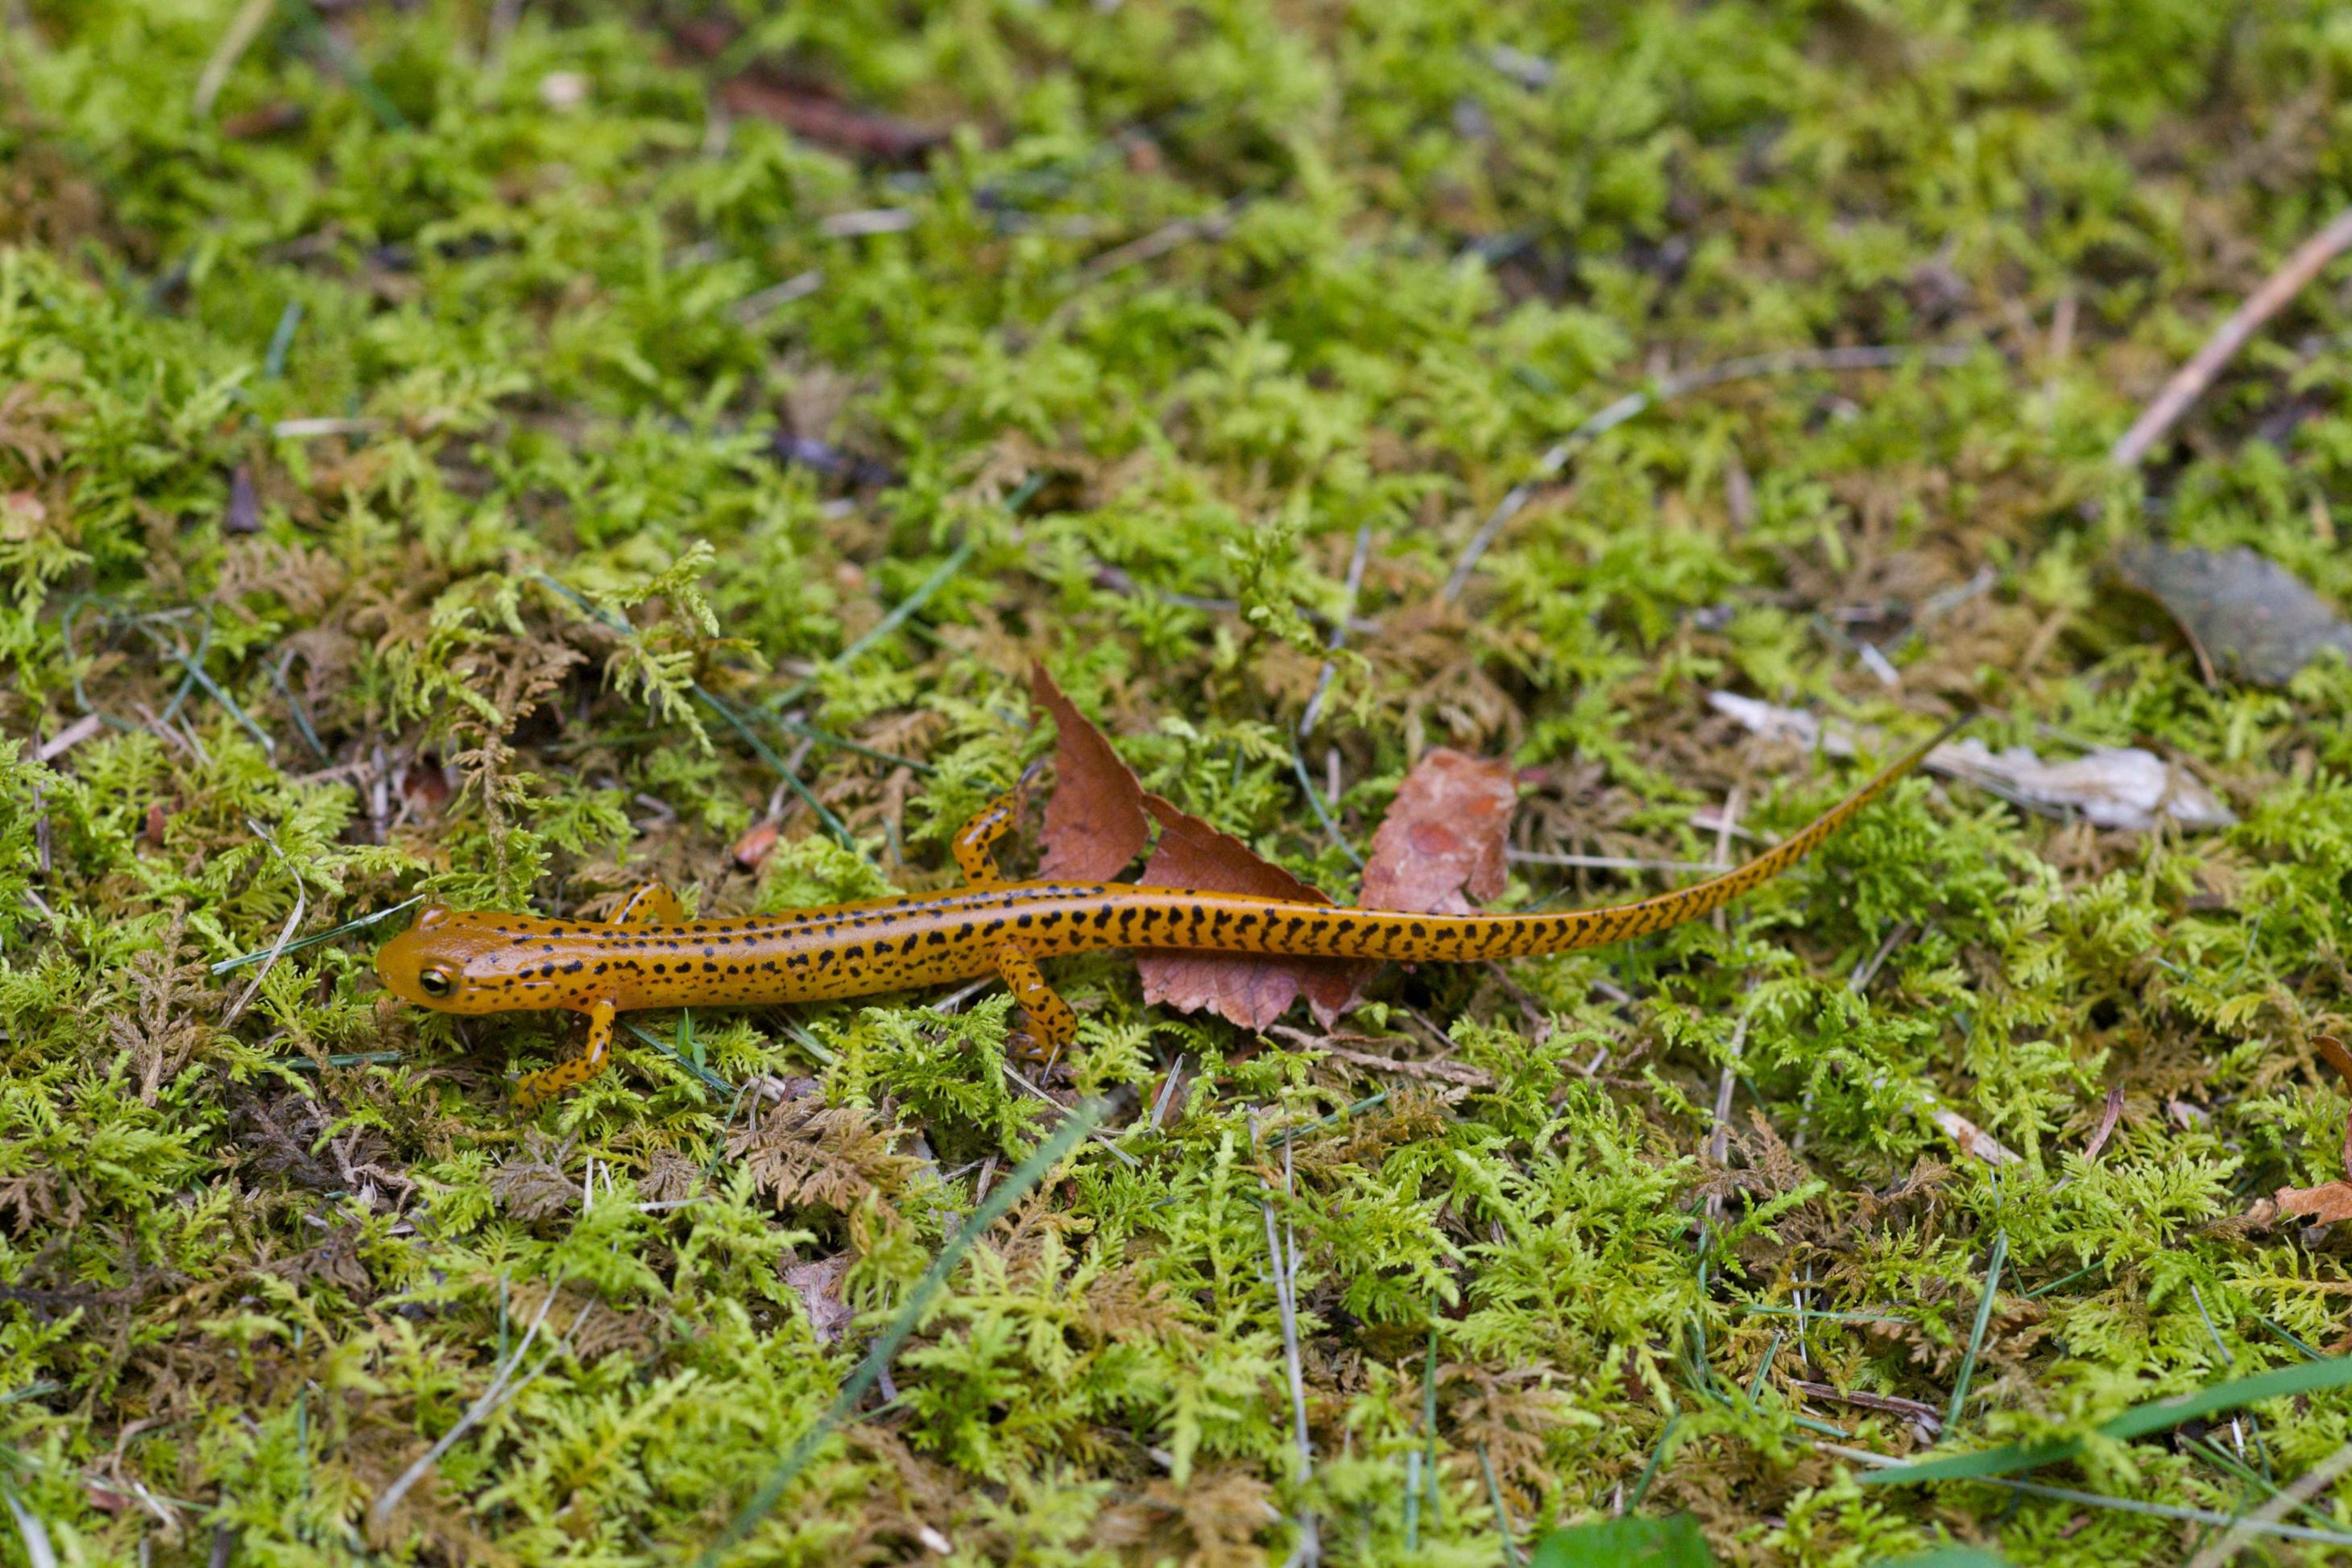 https://pixnio.com/fauna-animals/reptiles-and-amphibians/lizards-and-geckos-pictures/longtail-salamander-on-moss